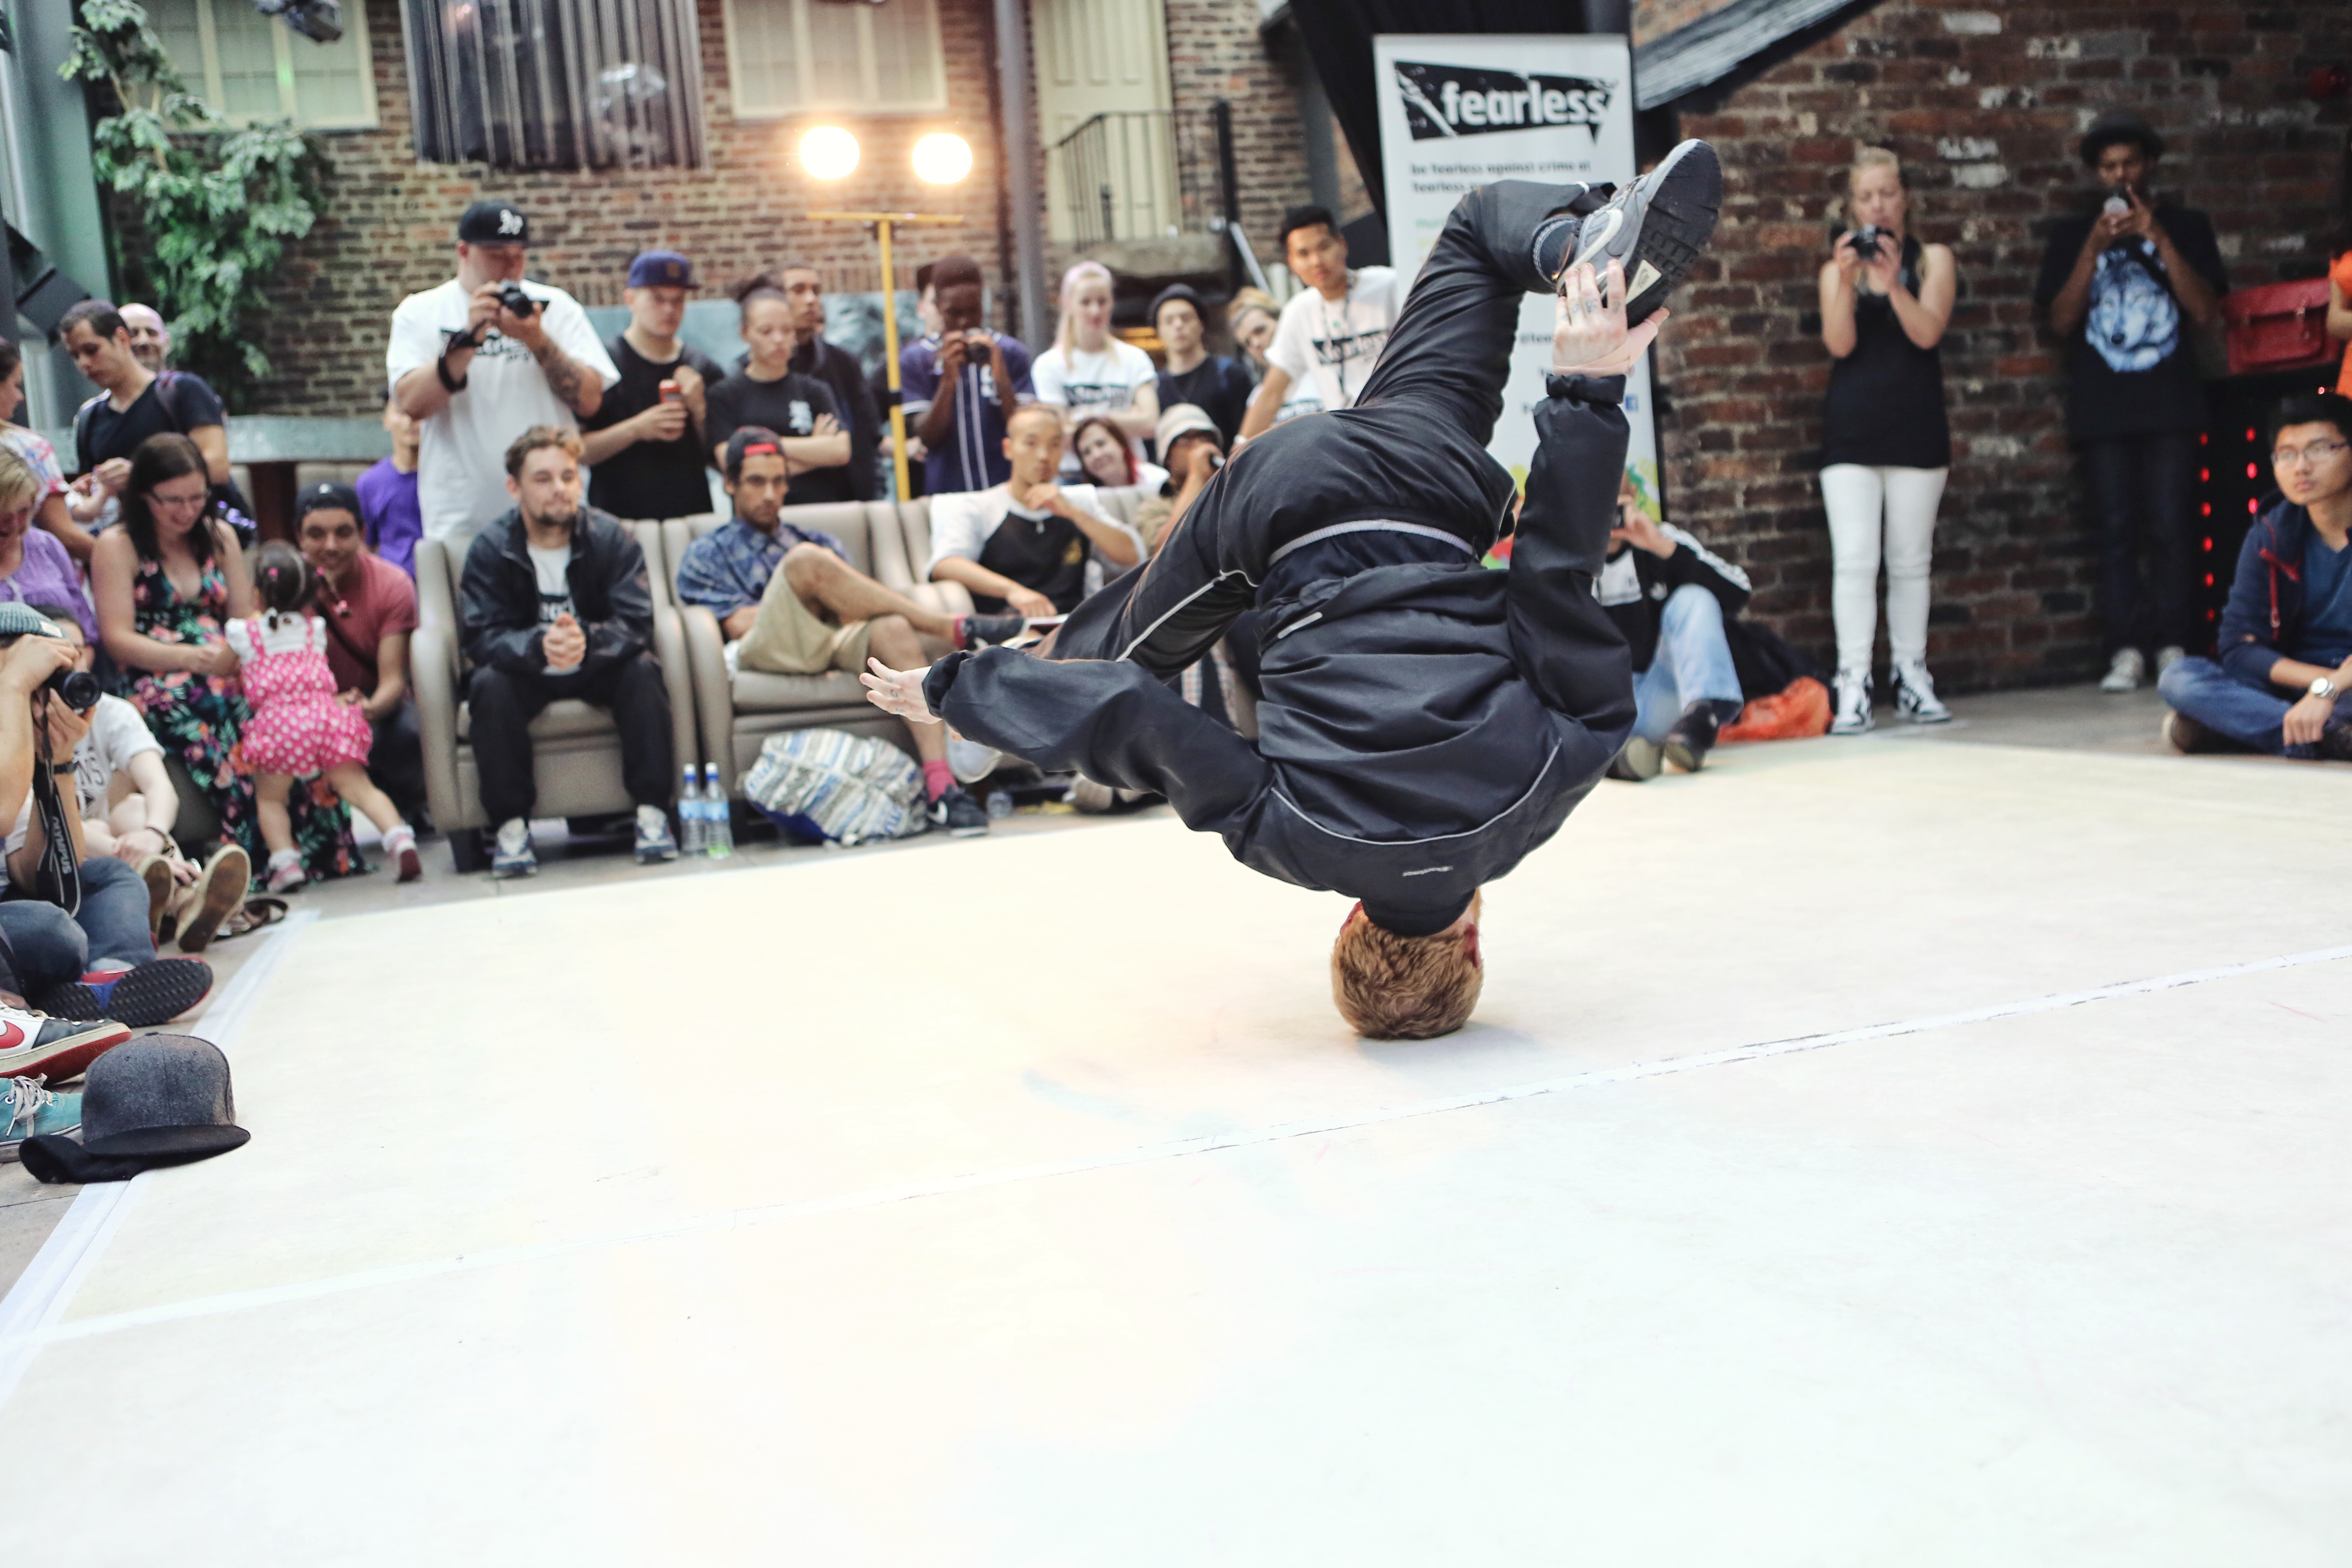 Breakdancing is about to be at Olympic status at Paris 2024